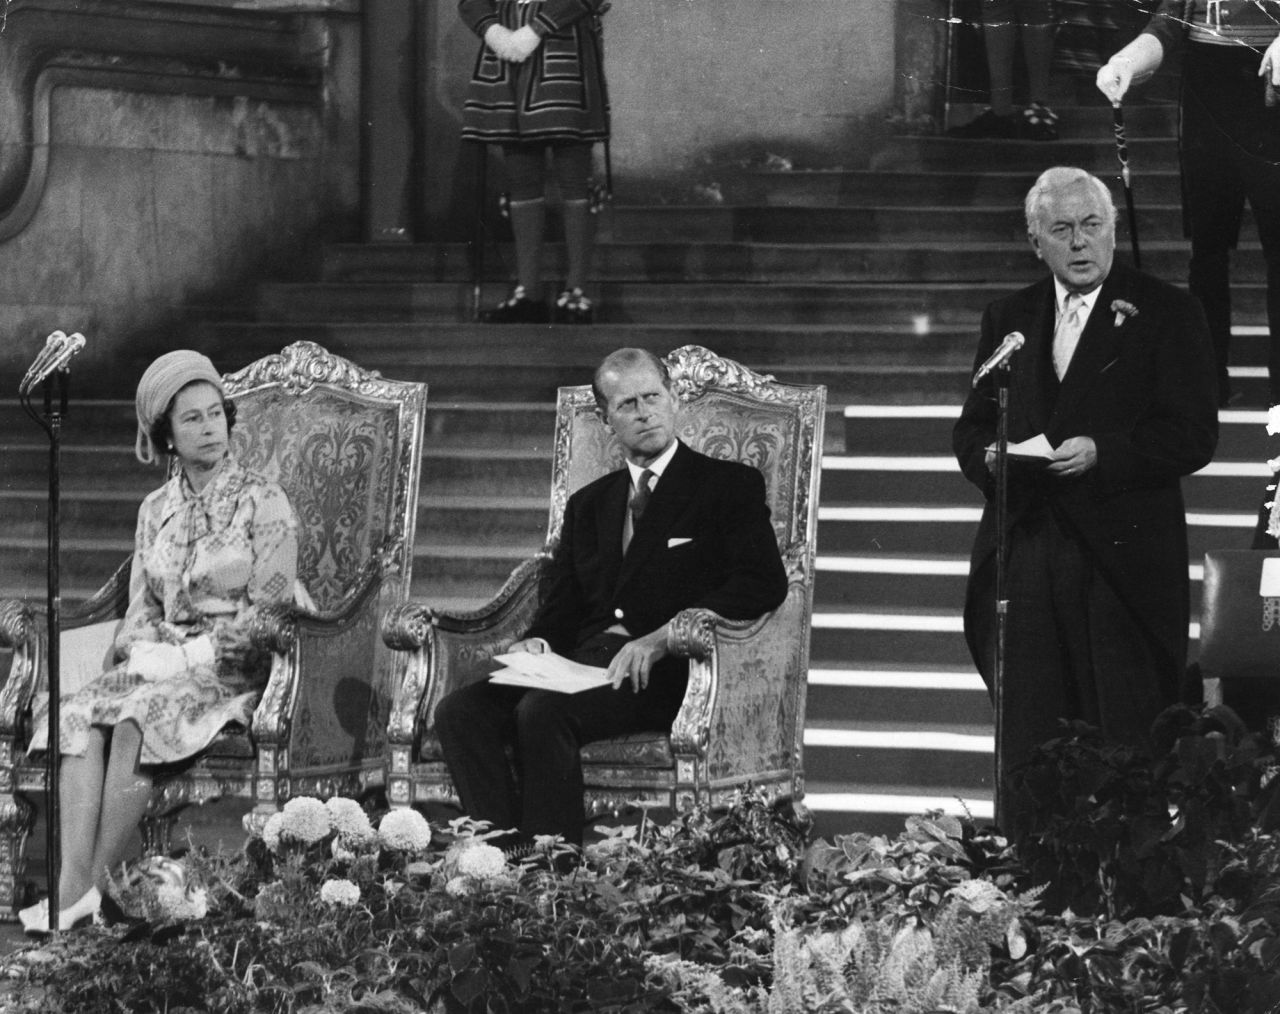 <strong>Harold Wilson (1964-1970, 1974-1976):</strong> Wilson, who came from a lower-middle-class background, became the Queen's first Labour Party prime minister. Wilson, seen here at right next to Prince Philip, often broke away from meeting traditions, and he enjoyed helping with the washing-up after barbecues at Balmoral — one of the Queen's residences. The Queen, however, warmed to Wilson's informal presence and even invited him to stay for drinks after their first meeting, which was not commonplace.